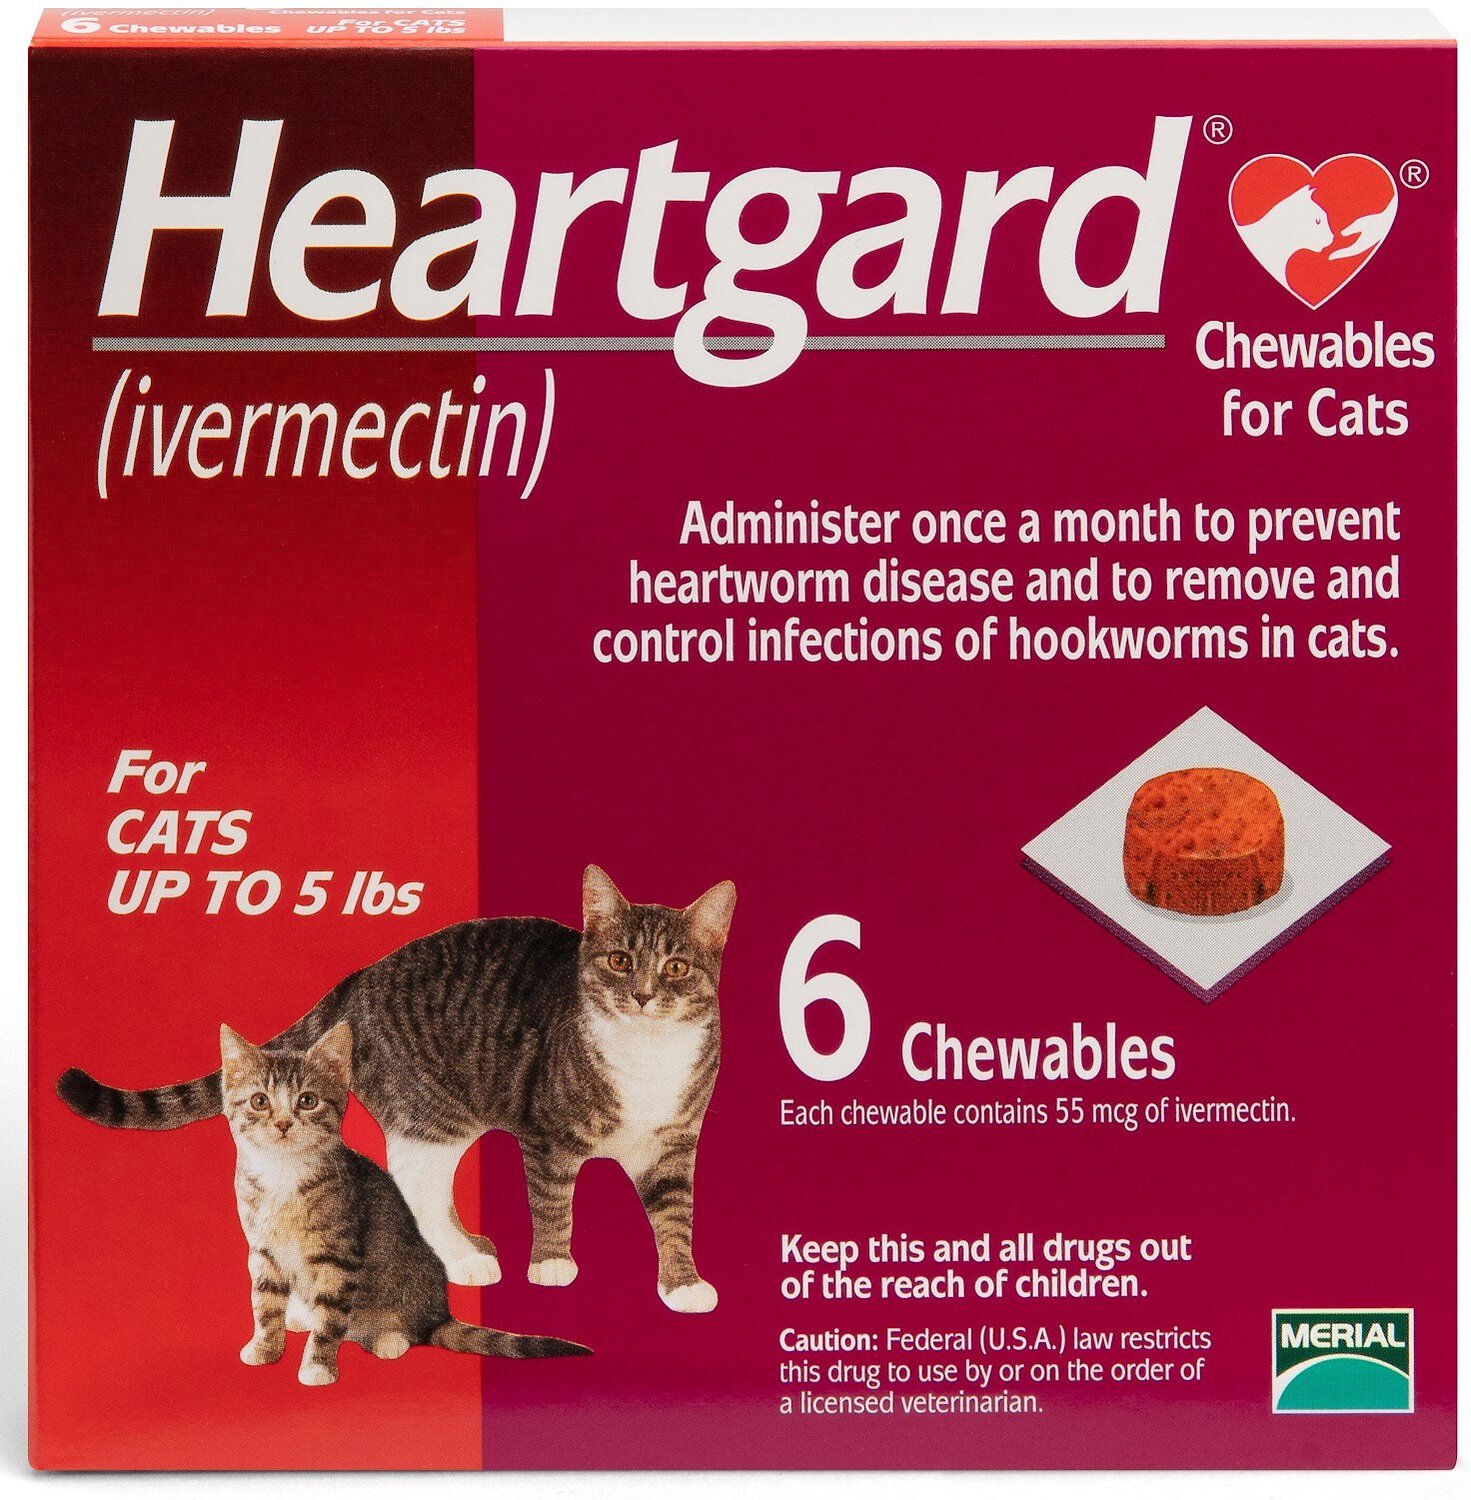 HEARTGARD Chewables for Cats, up to 5 lbs, 6 treatments (Red Box